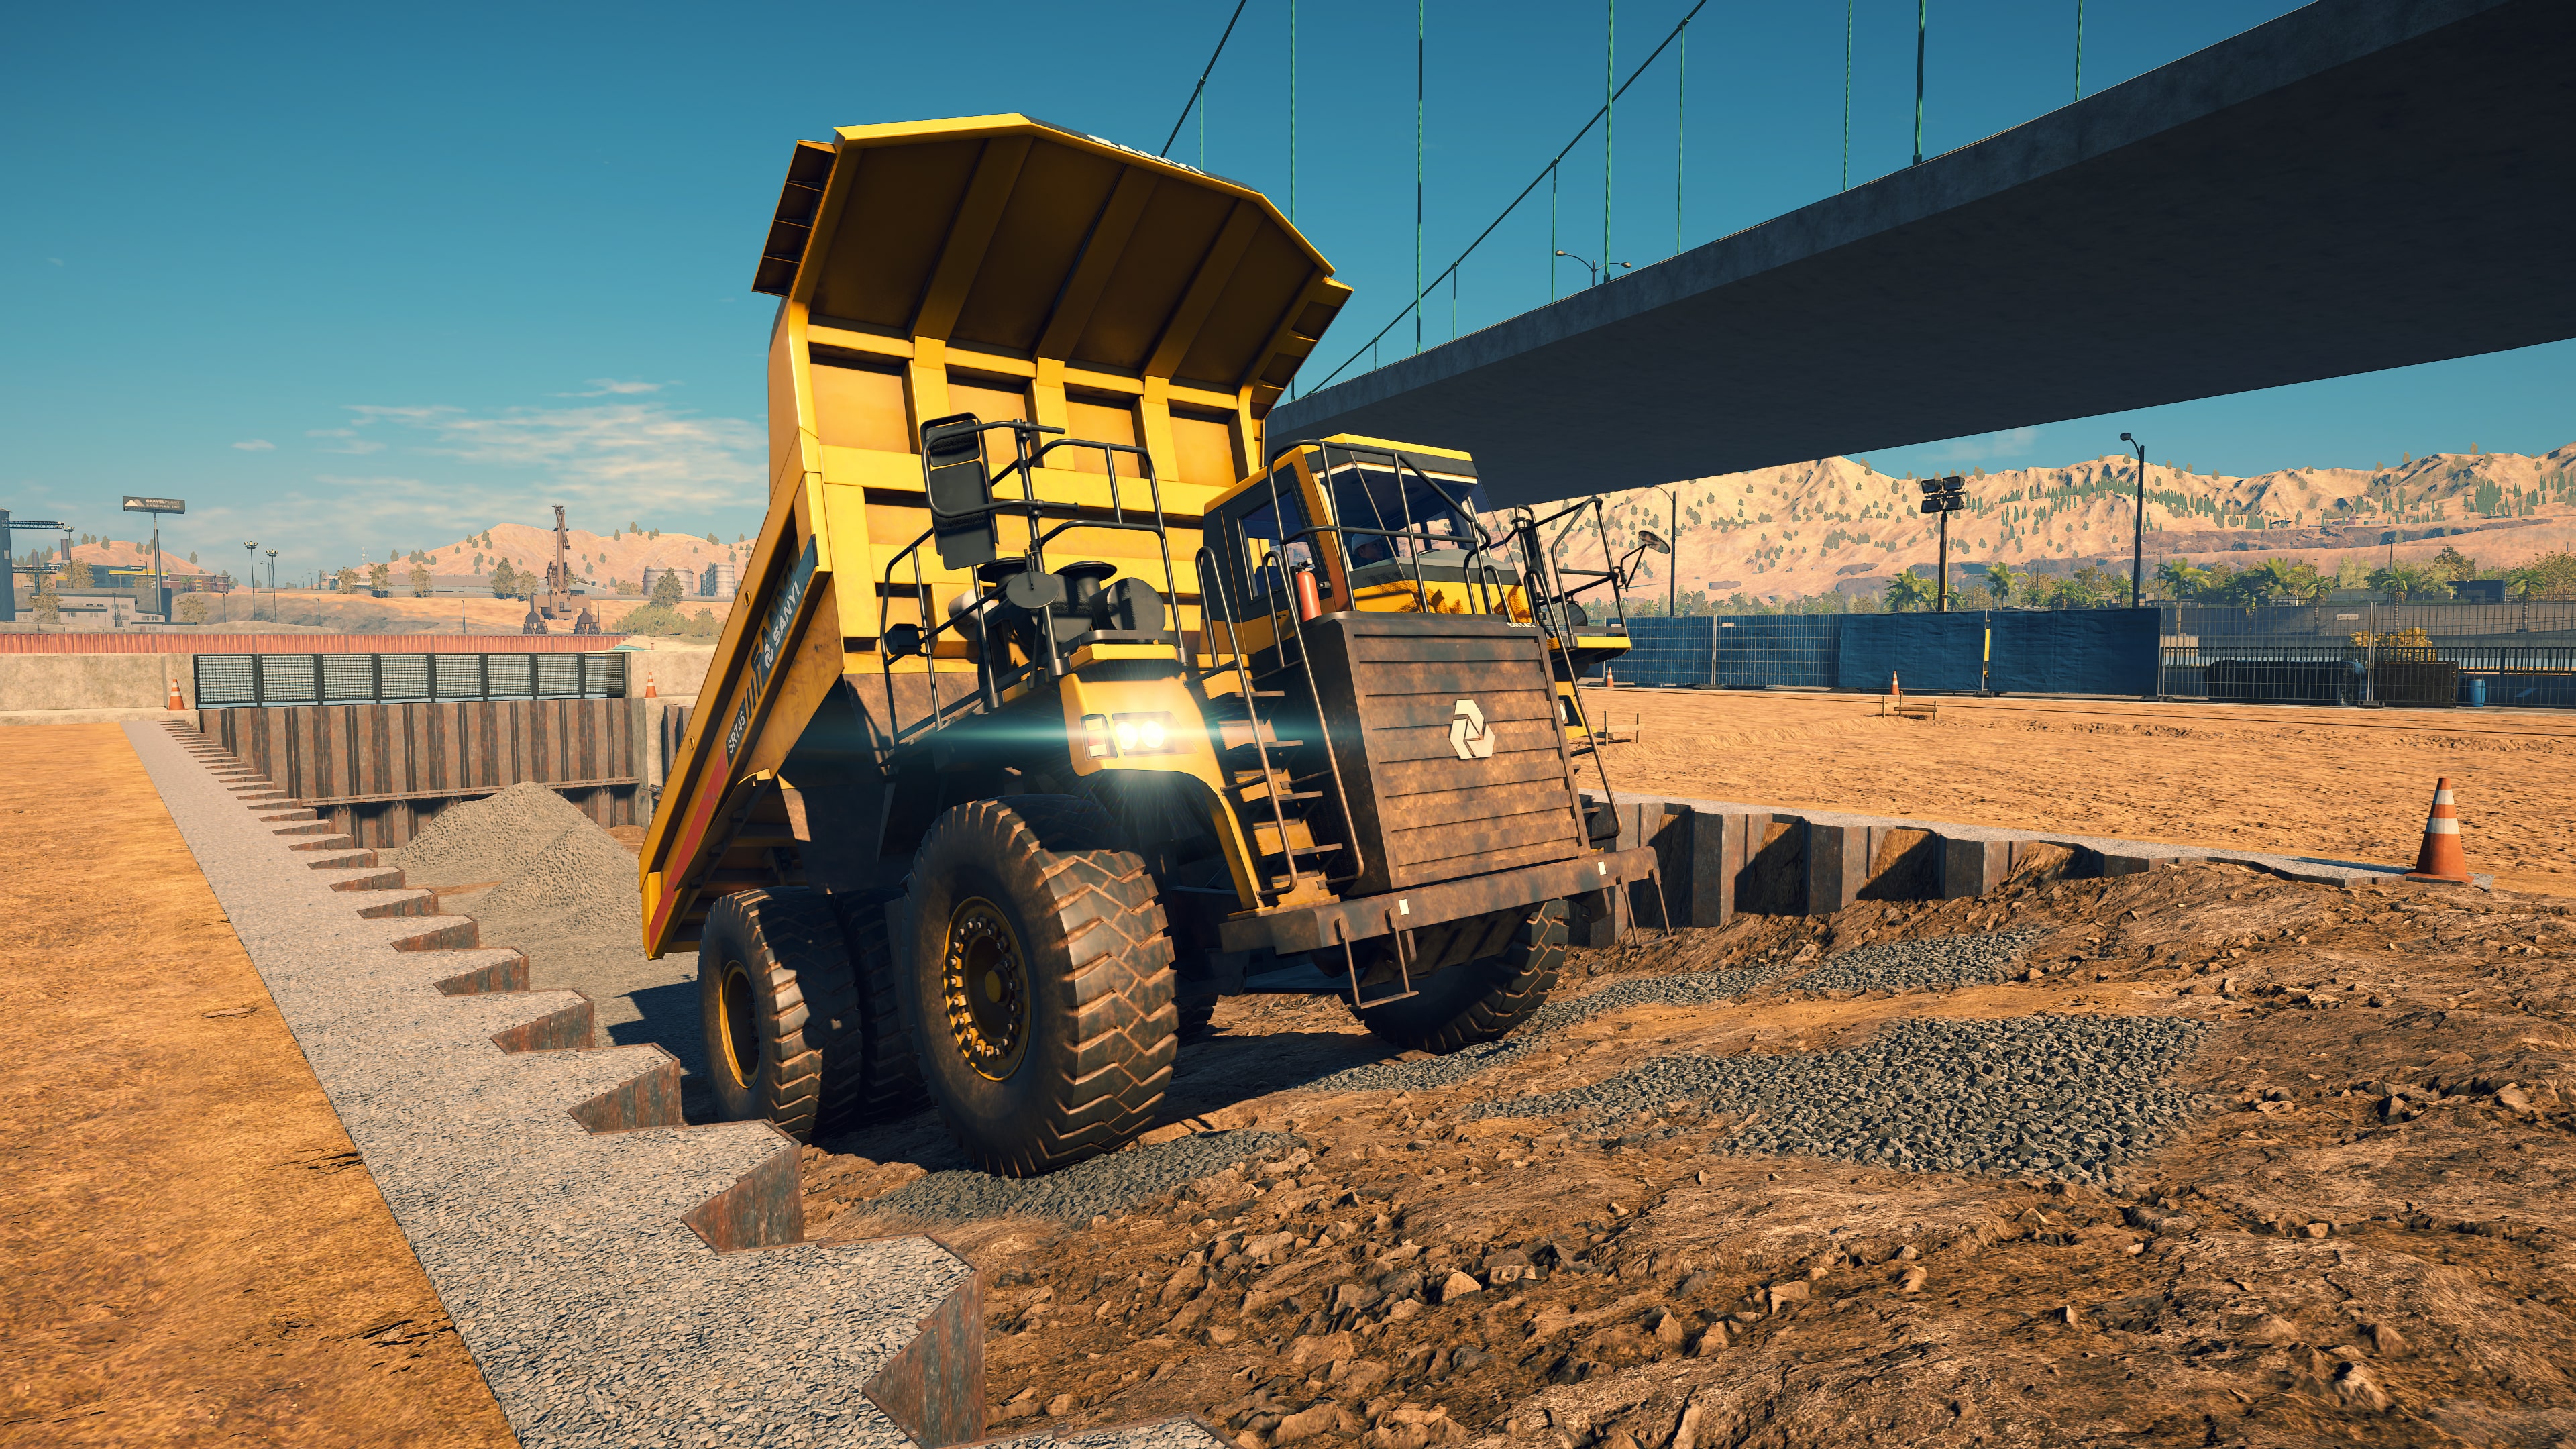 Construction Simulator (PS5) • See the best prices »